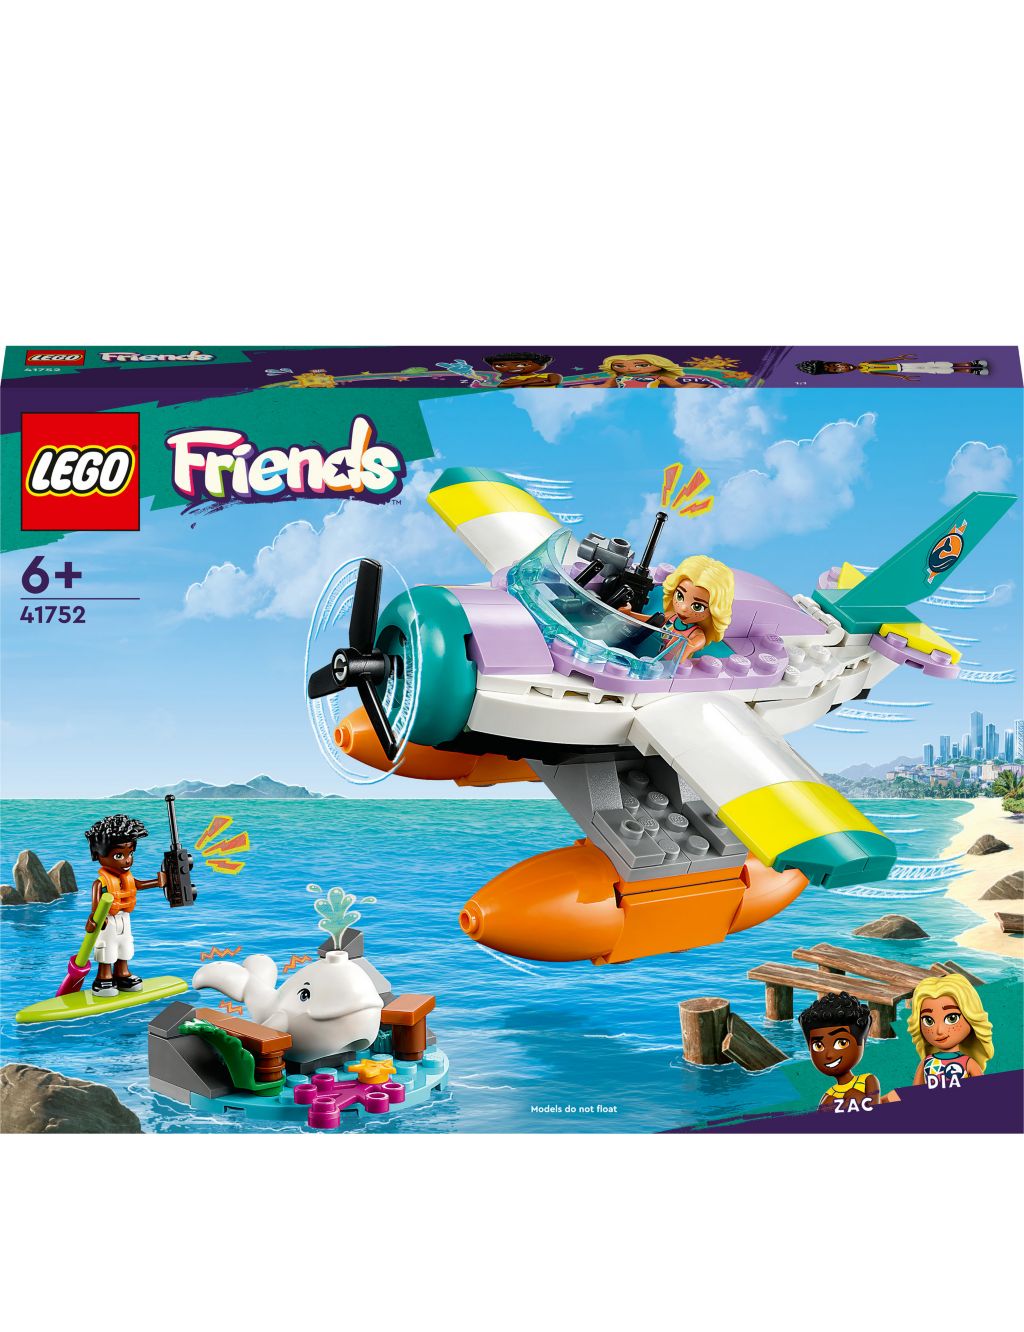 LEGO Friends Sea Rescue Plane Toy Playset 41752 (6+ Yrs) 2 of 6